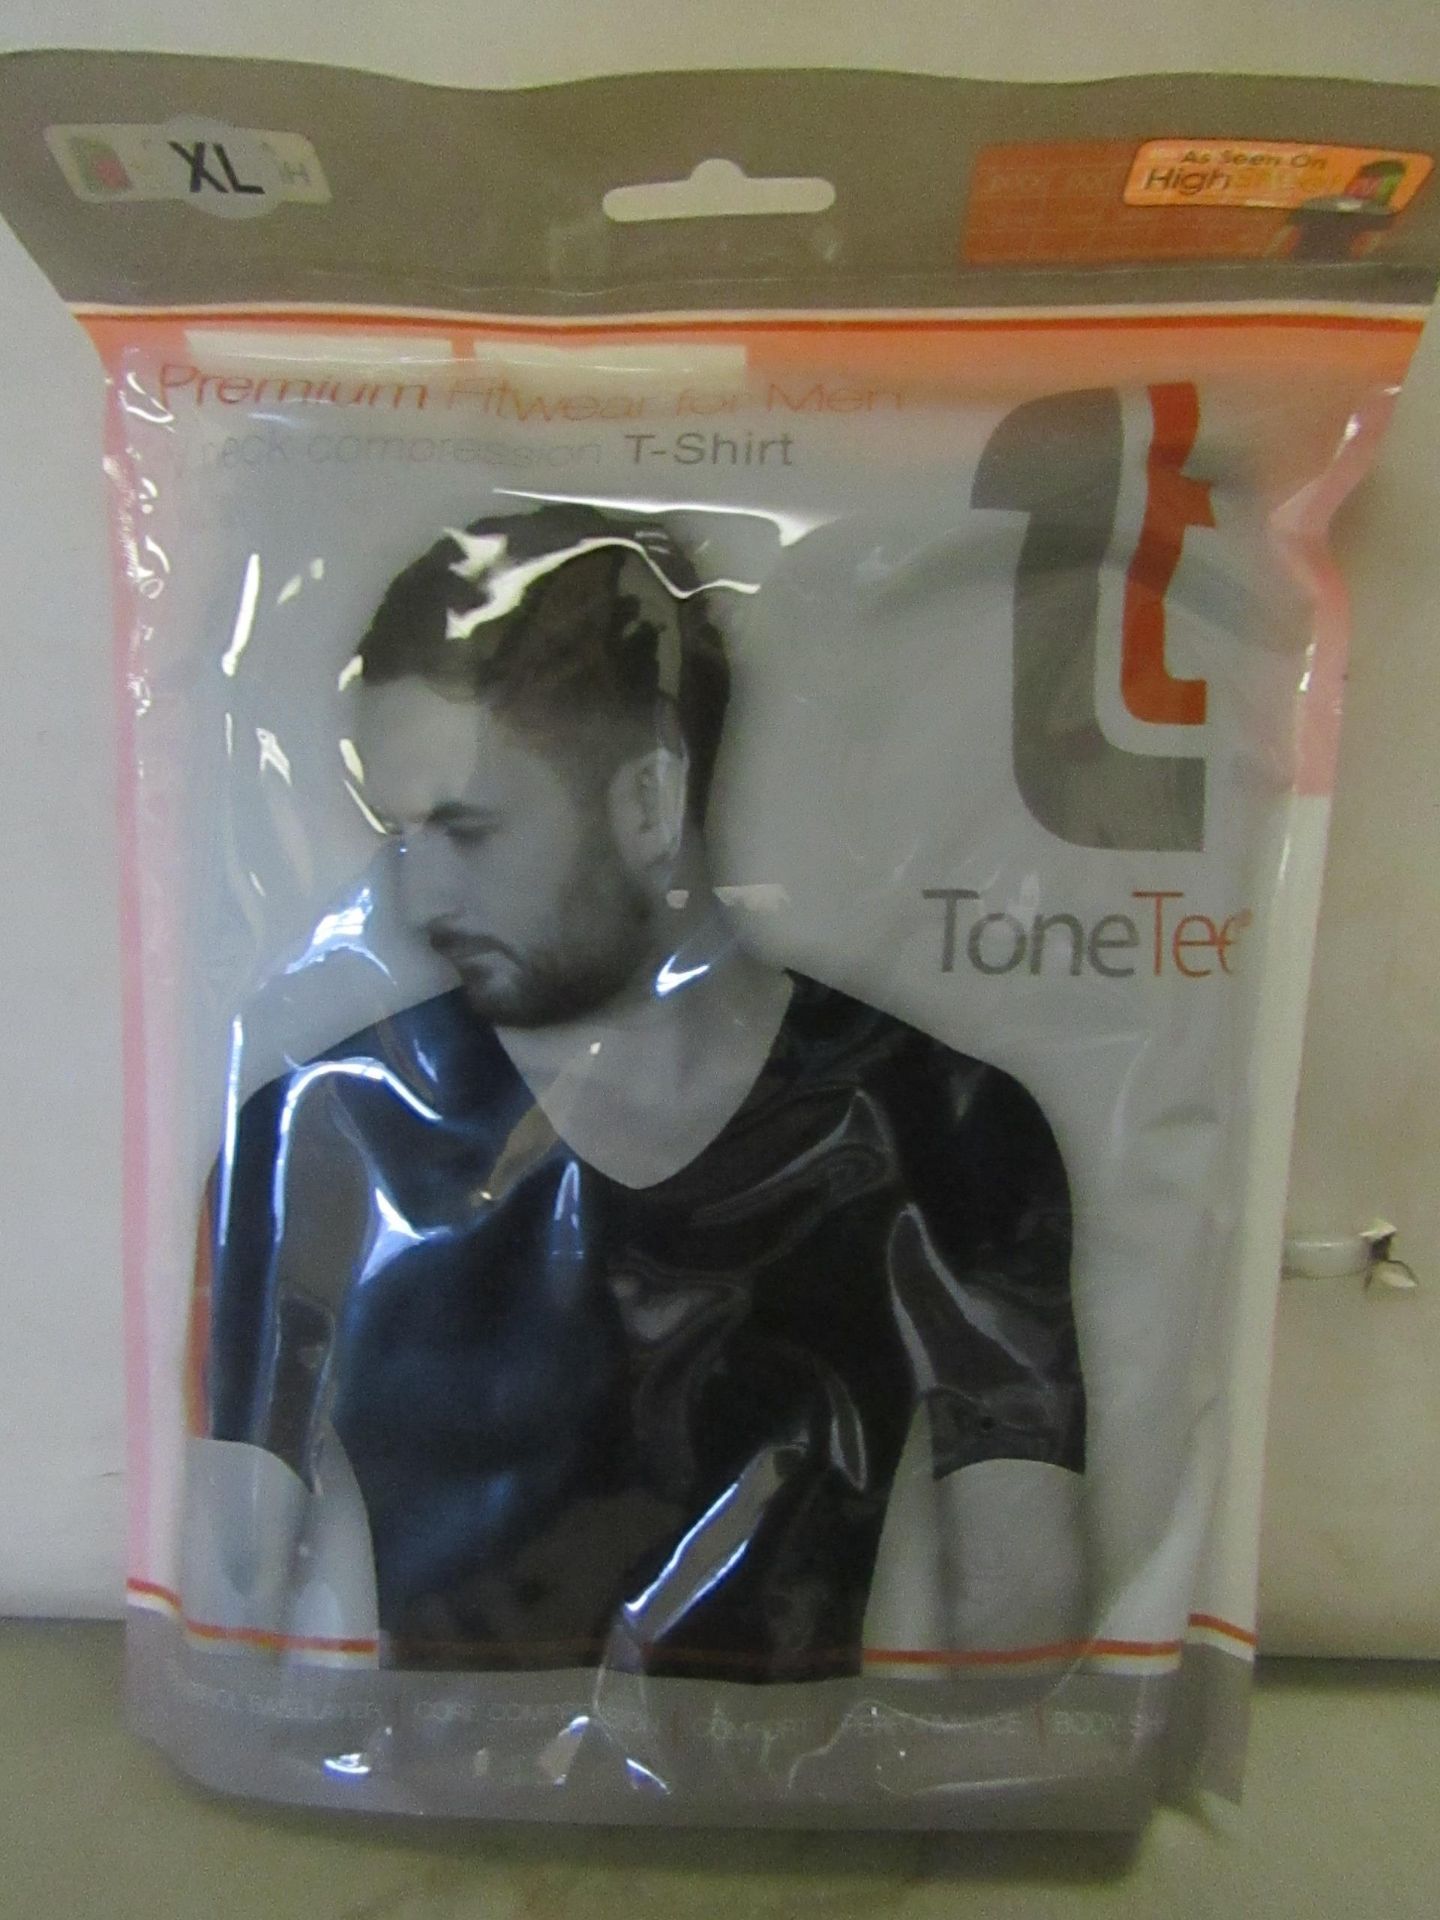 ToneTee v-Neck Compression T/Shirt Black Size X/L New & Packaged